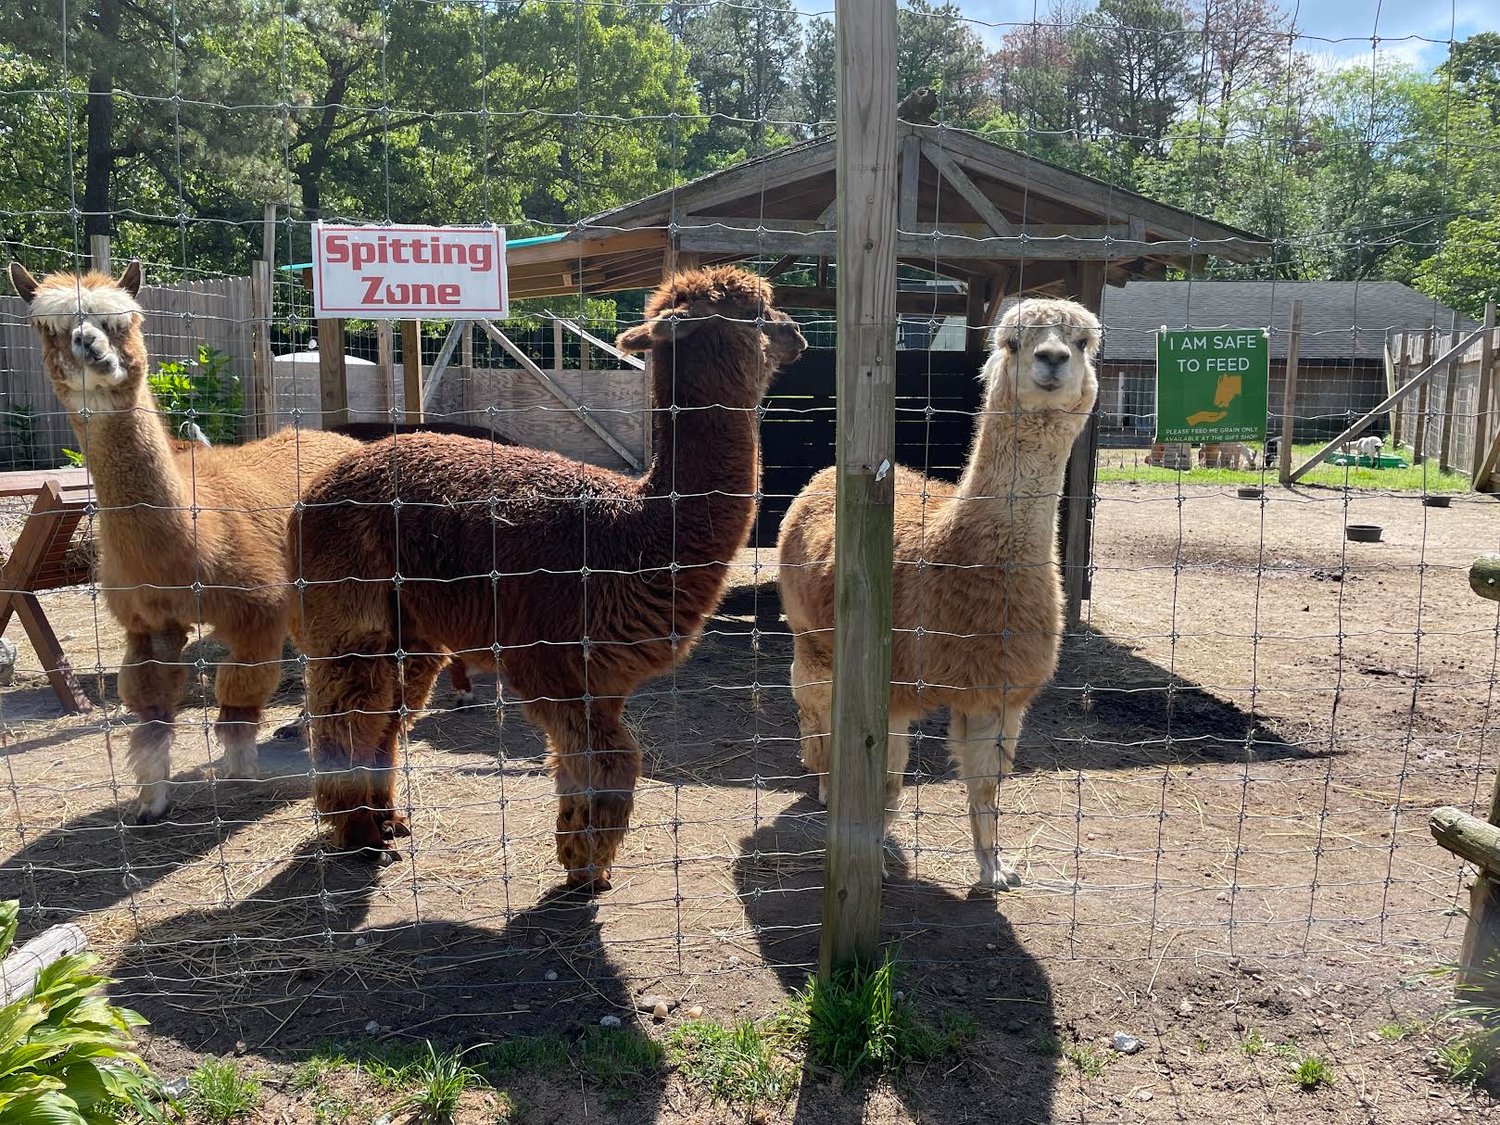 Steer clear of the alpaca’s spit zone—or if you are brave enough, you may enter to feed them!